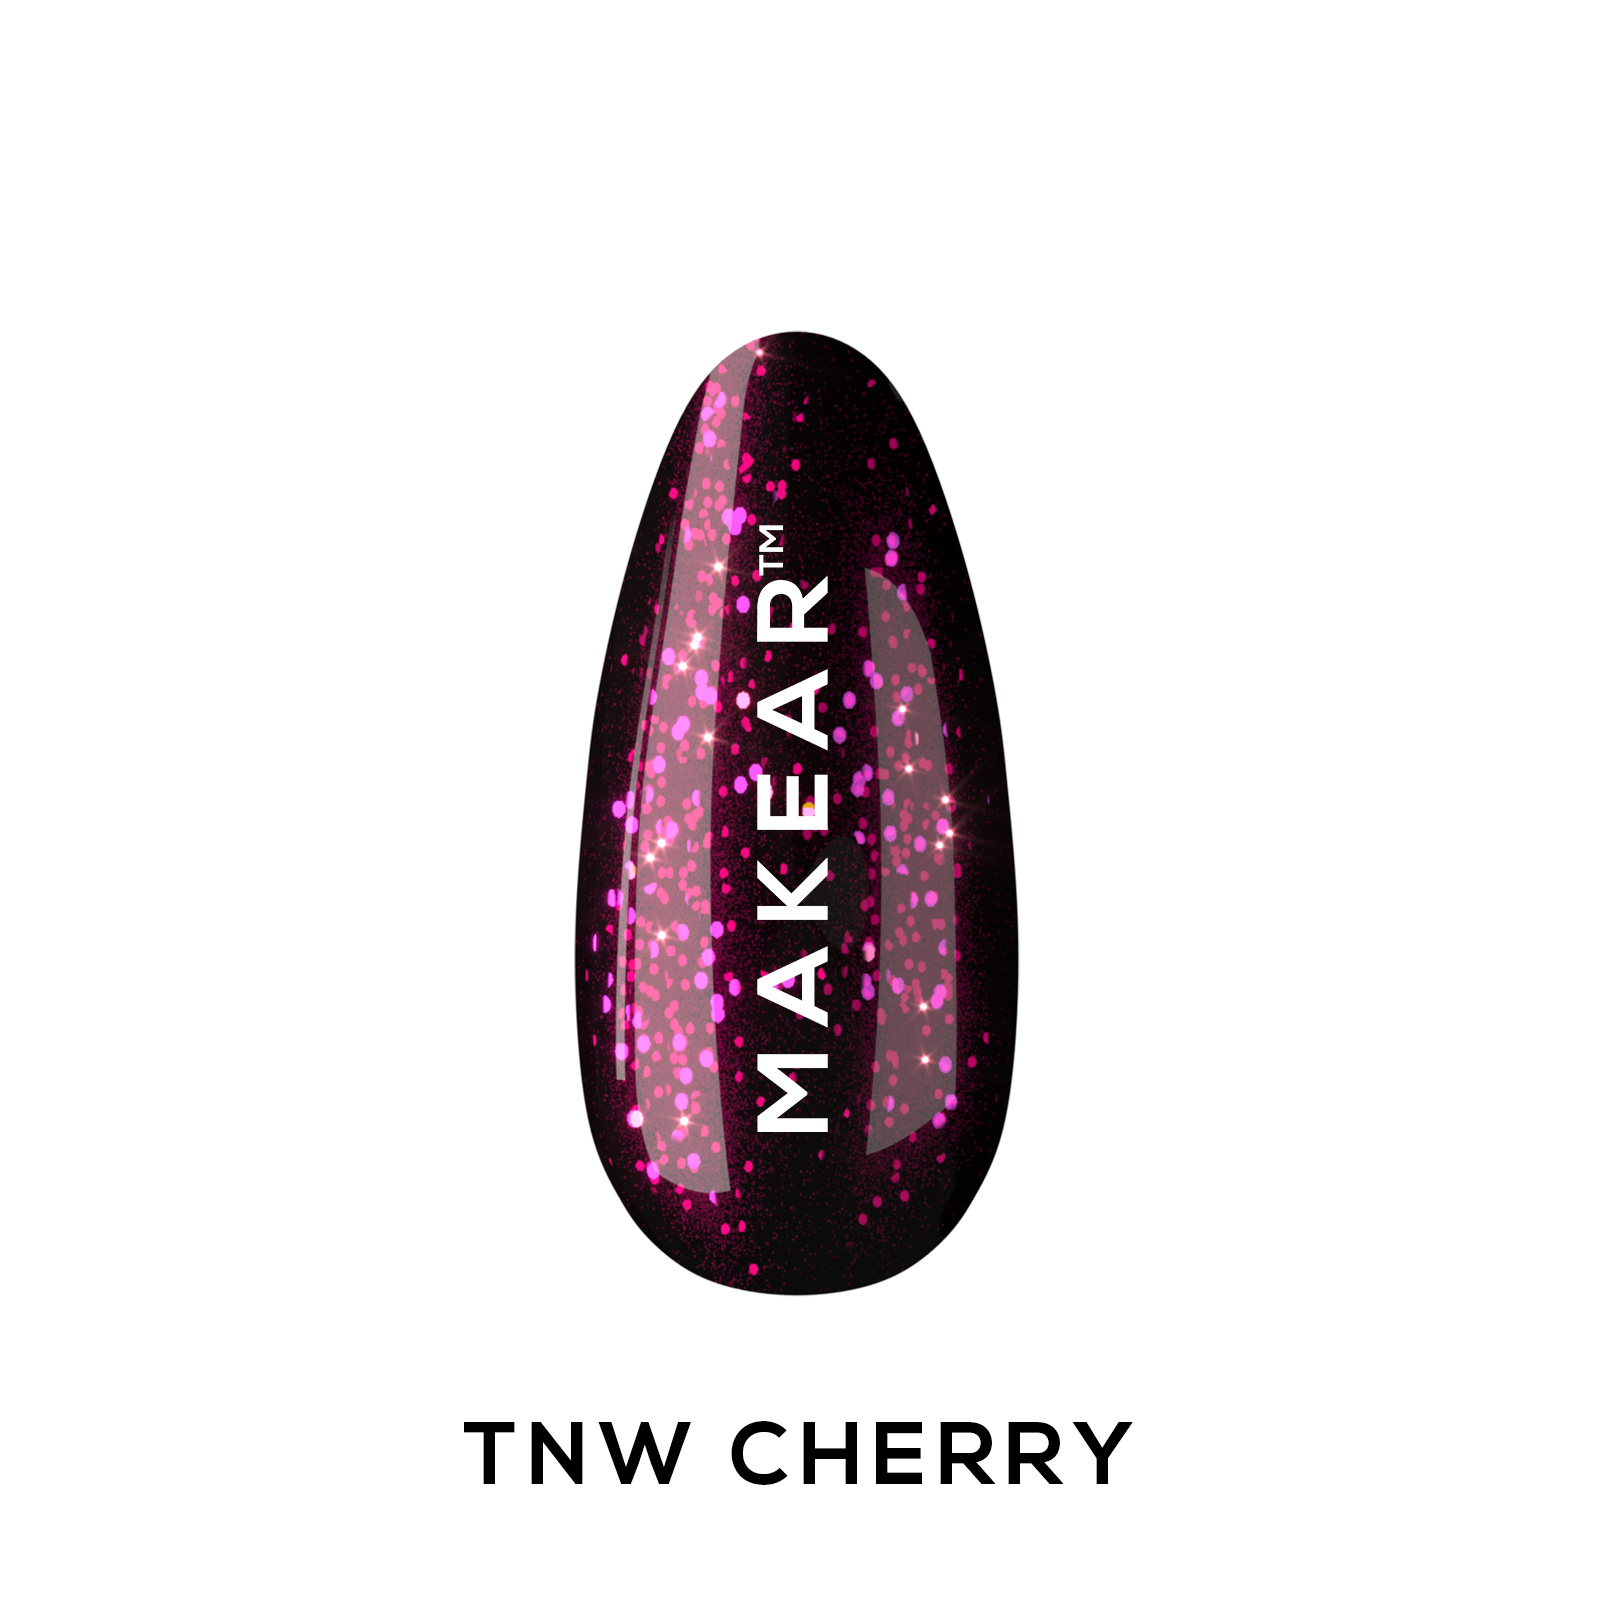 eng_pl_Top-Cherry-8ml-no-wipe-1207_3